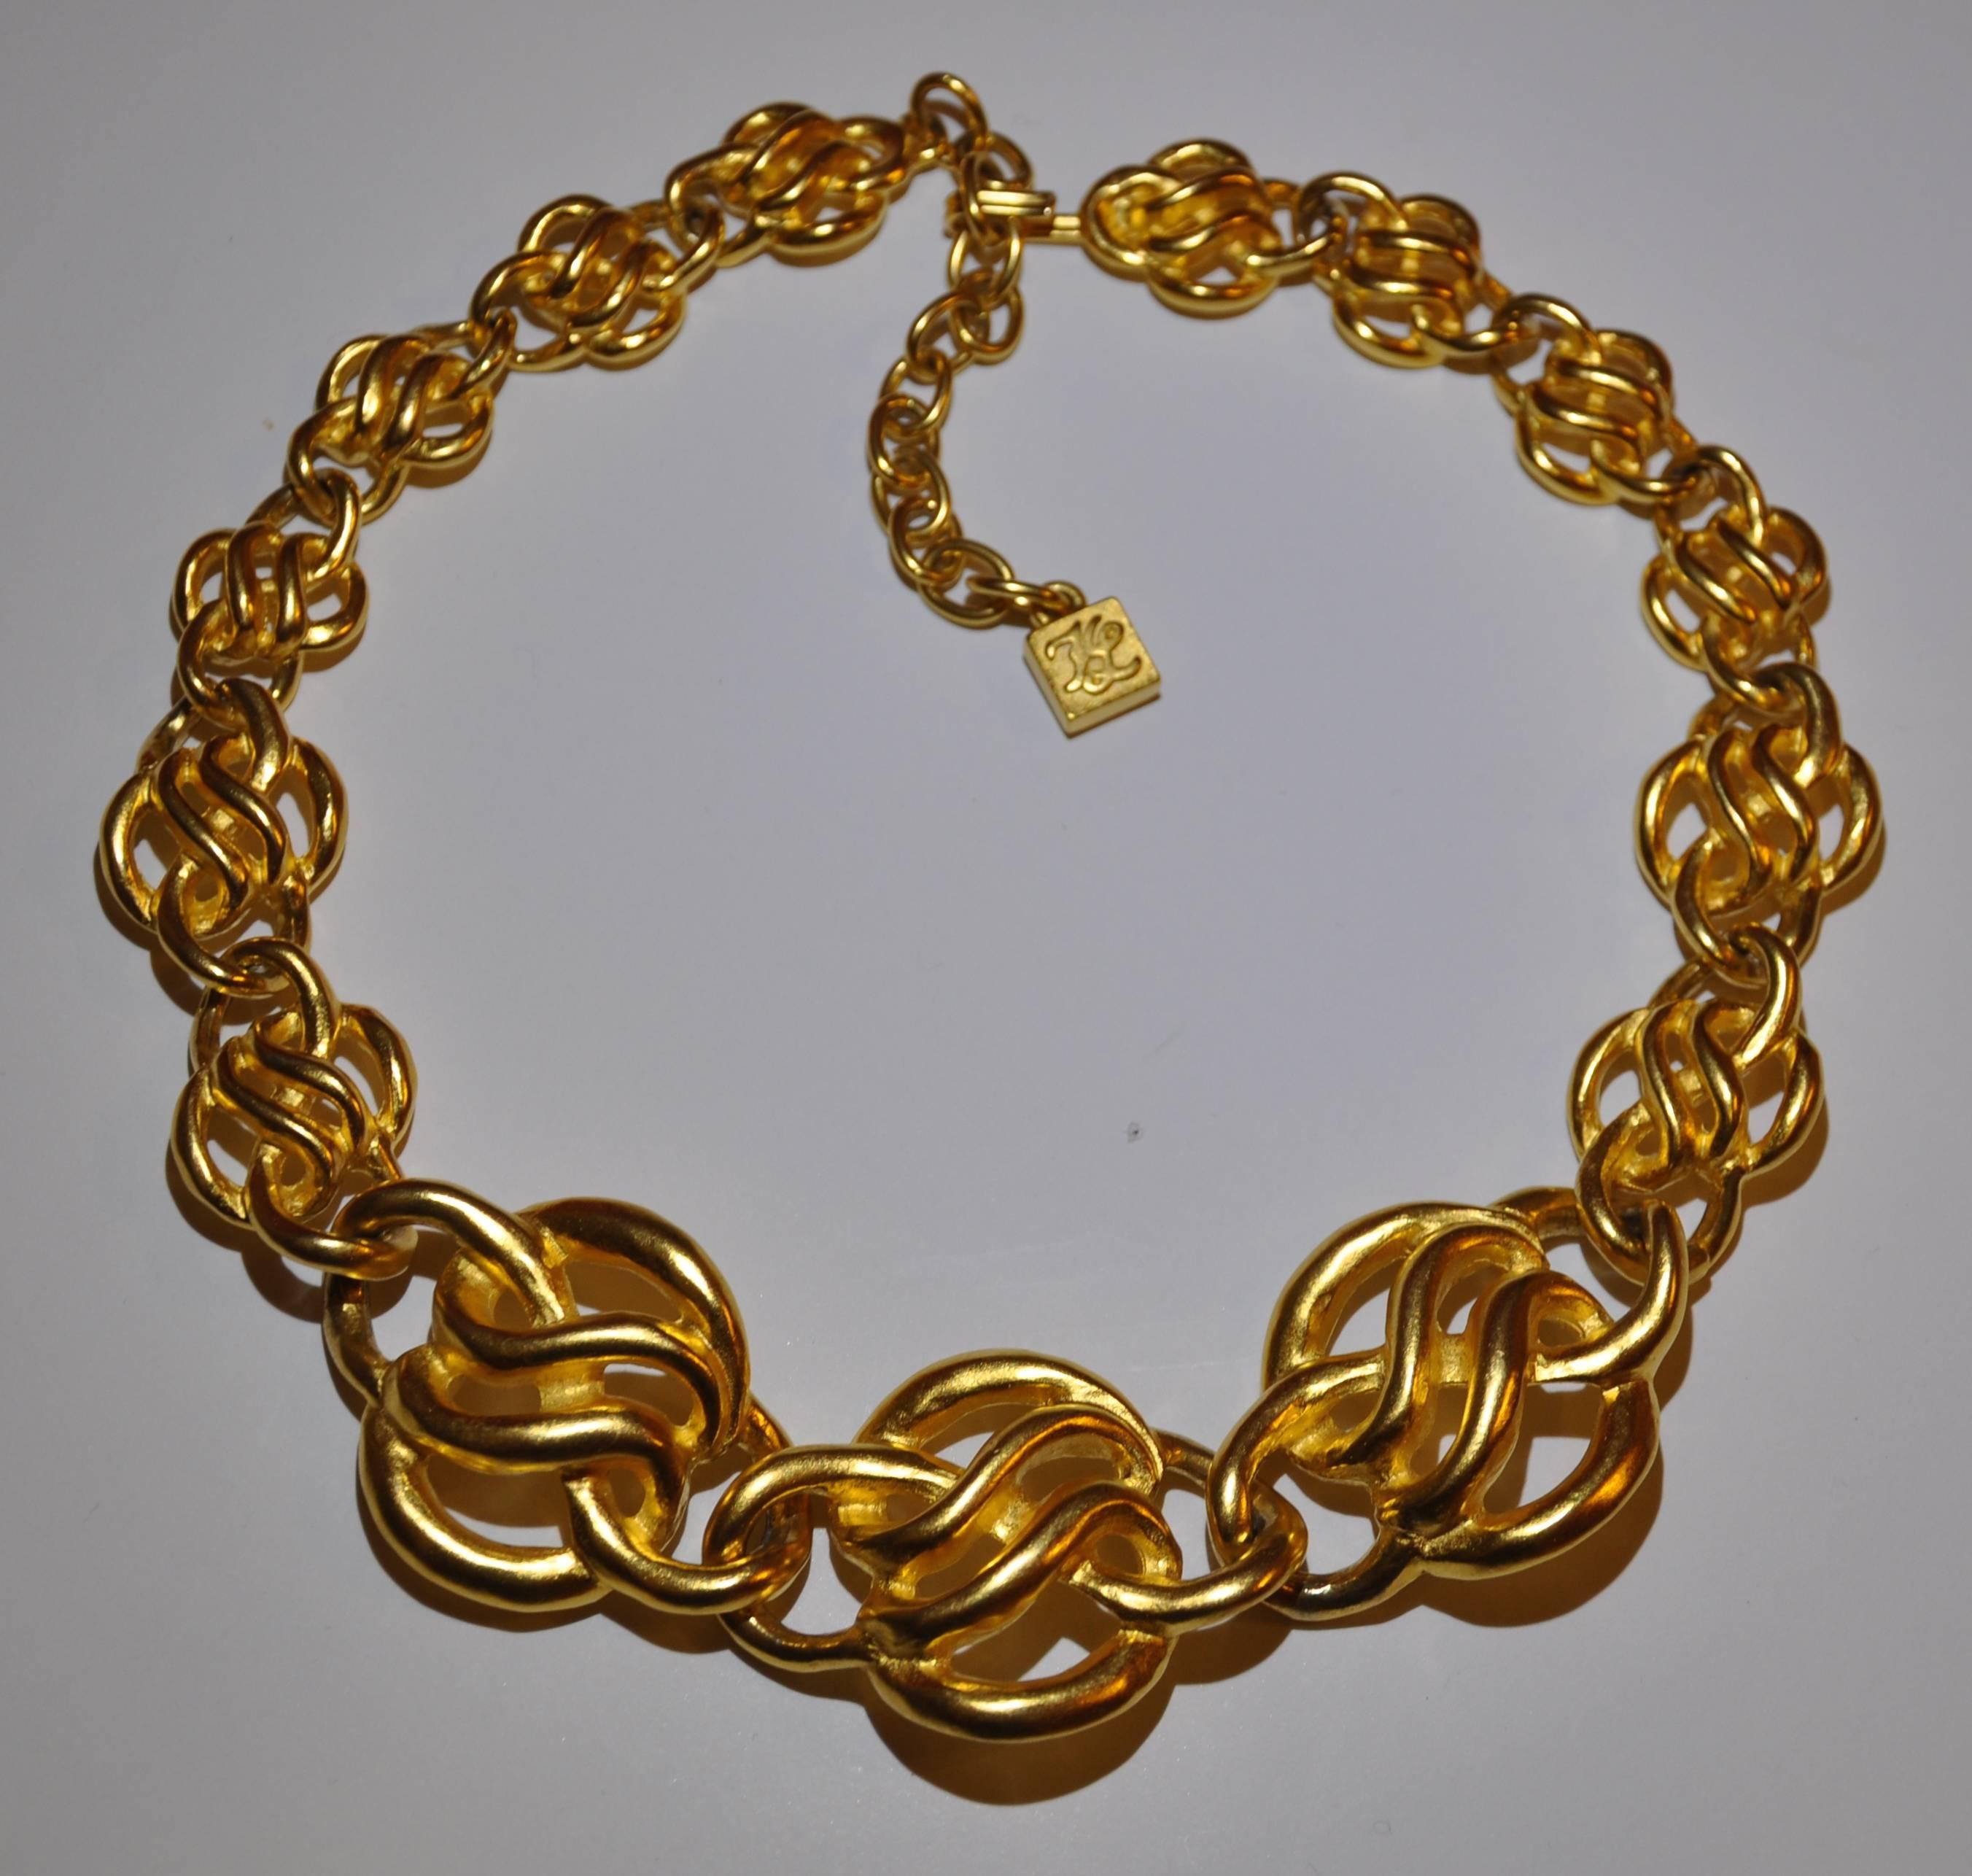      Karl Lagerfeld wonderful polished gilded gold tone adjustable necklace finished in a vermeil measures18 1/2" in total length. The width measures from 1 3/8" at the widest to 5/8" at the slimmest width. 